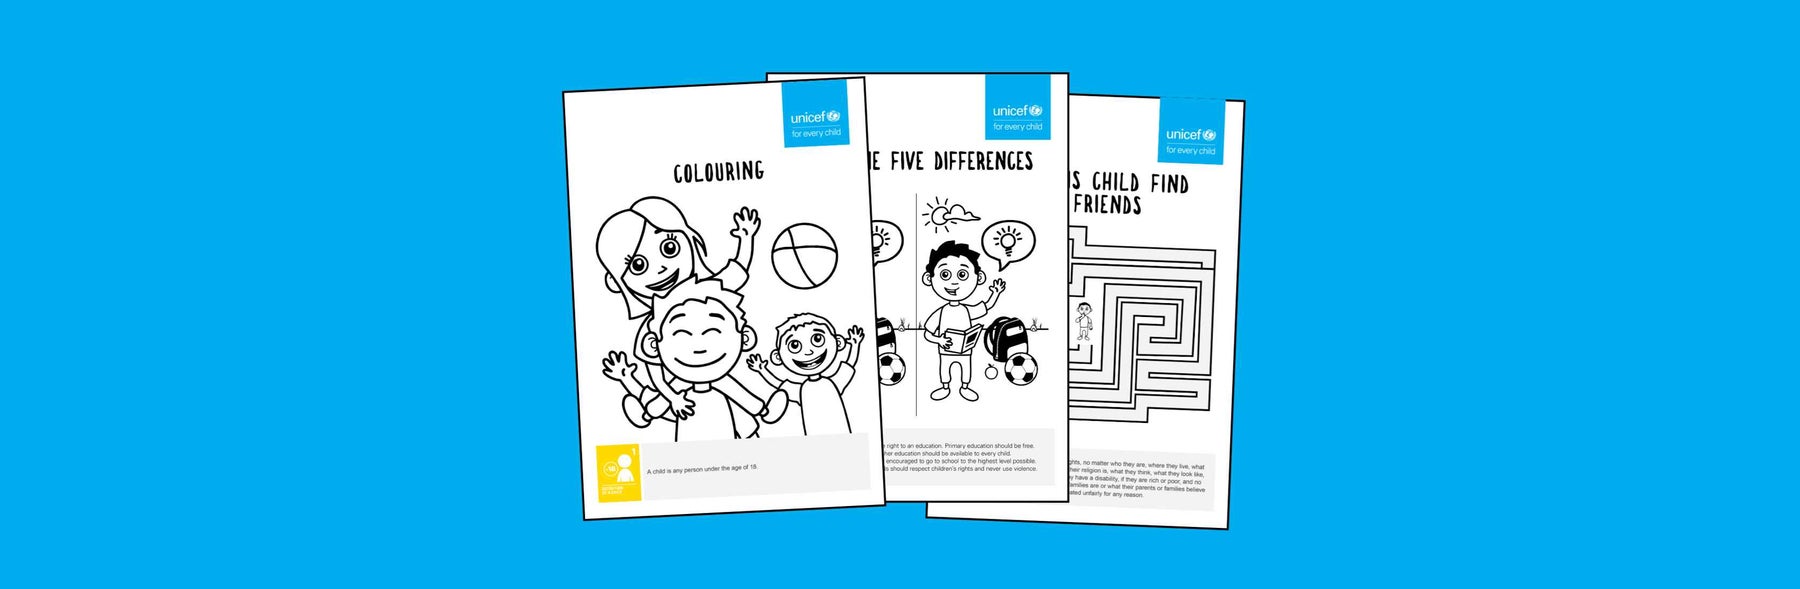 Pages from the Child Rights booklet